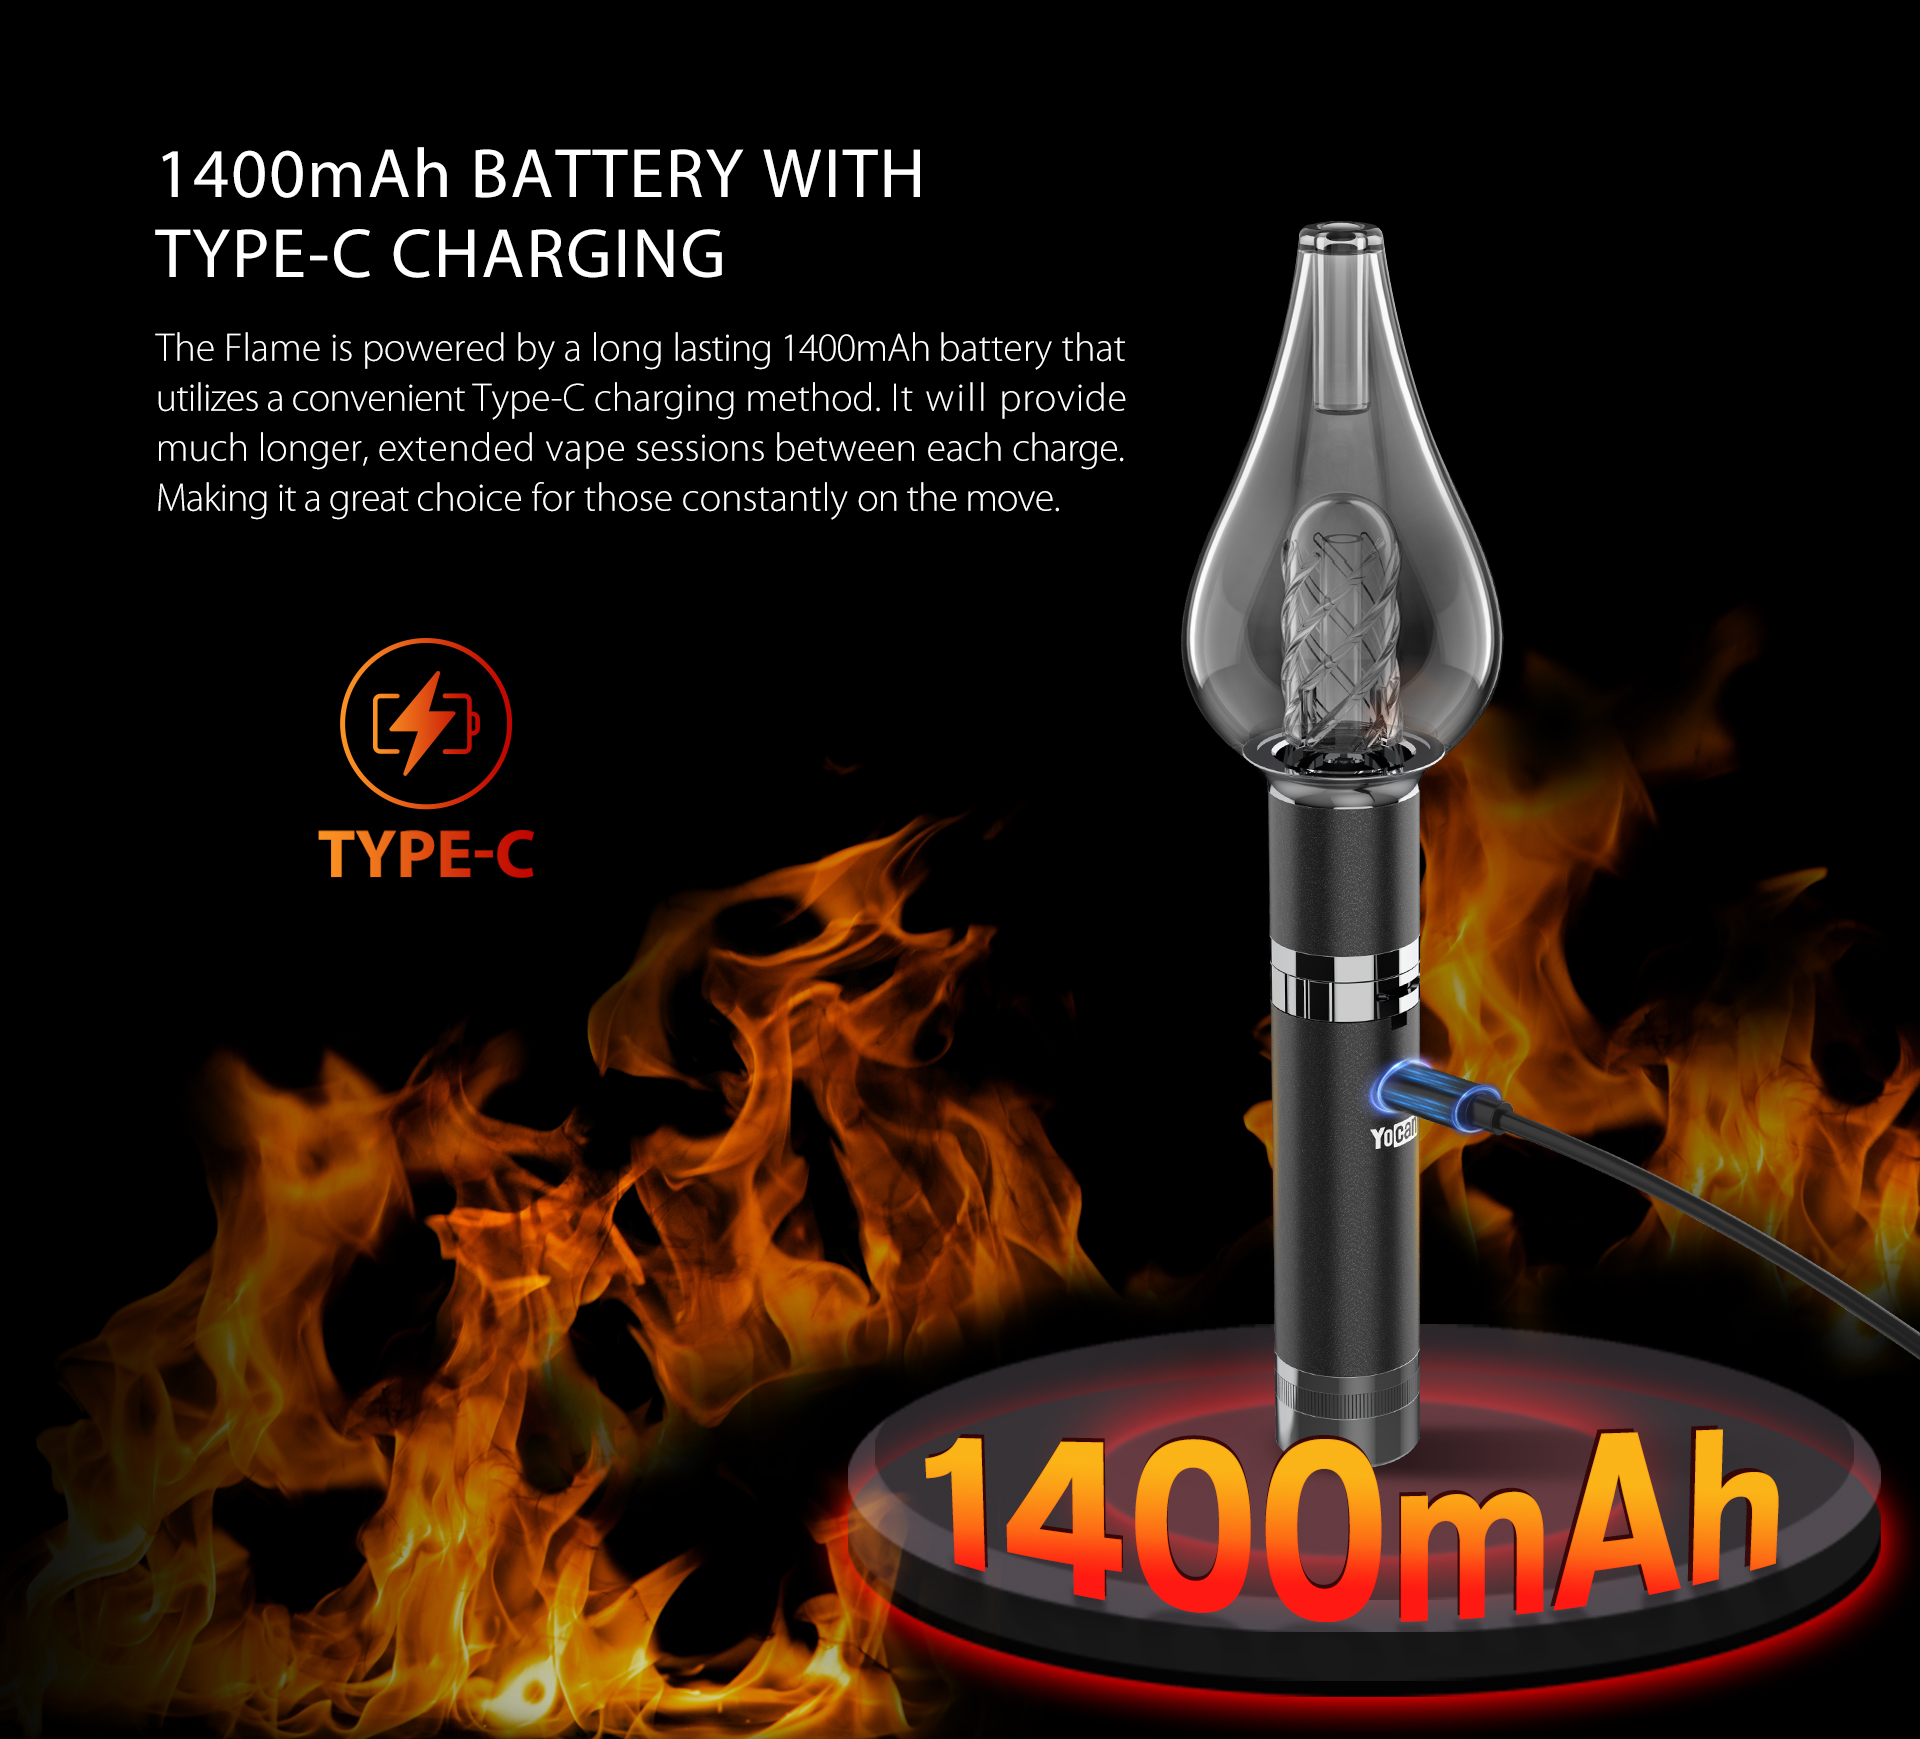 Yocan Flame vaporizer pen is powered by a long lasting 1400mAh battery